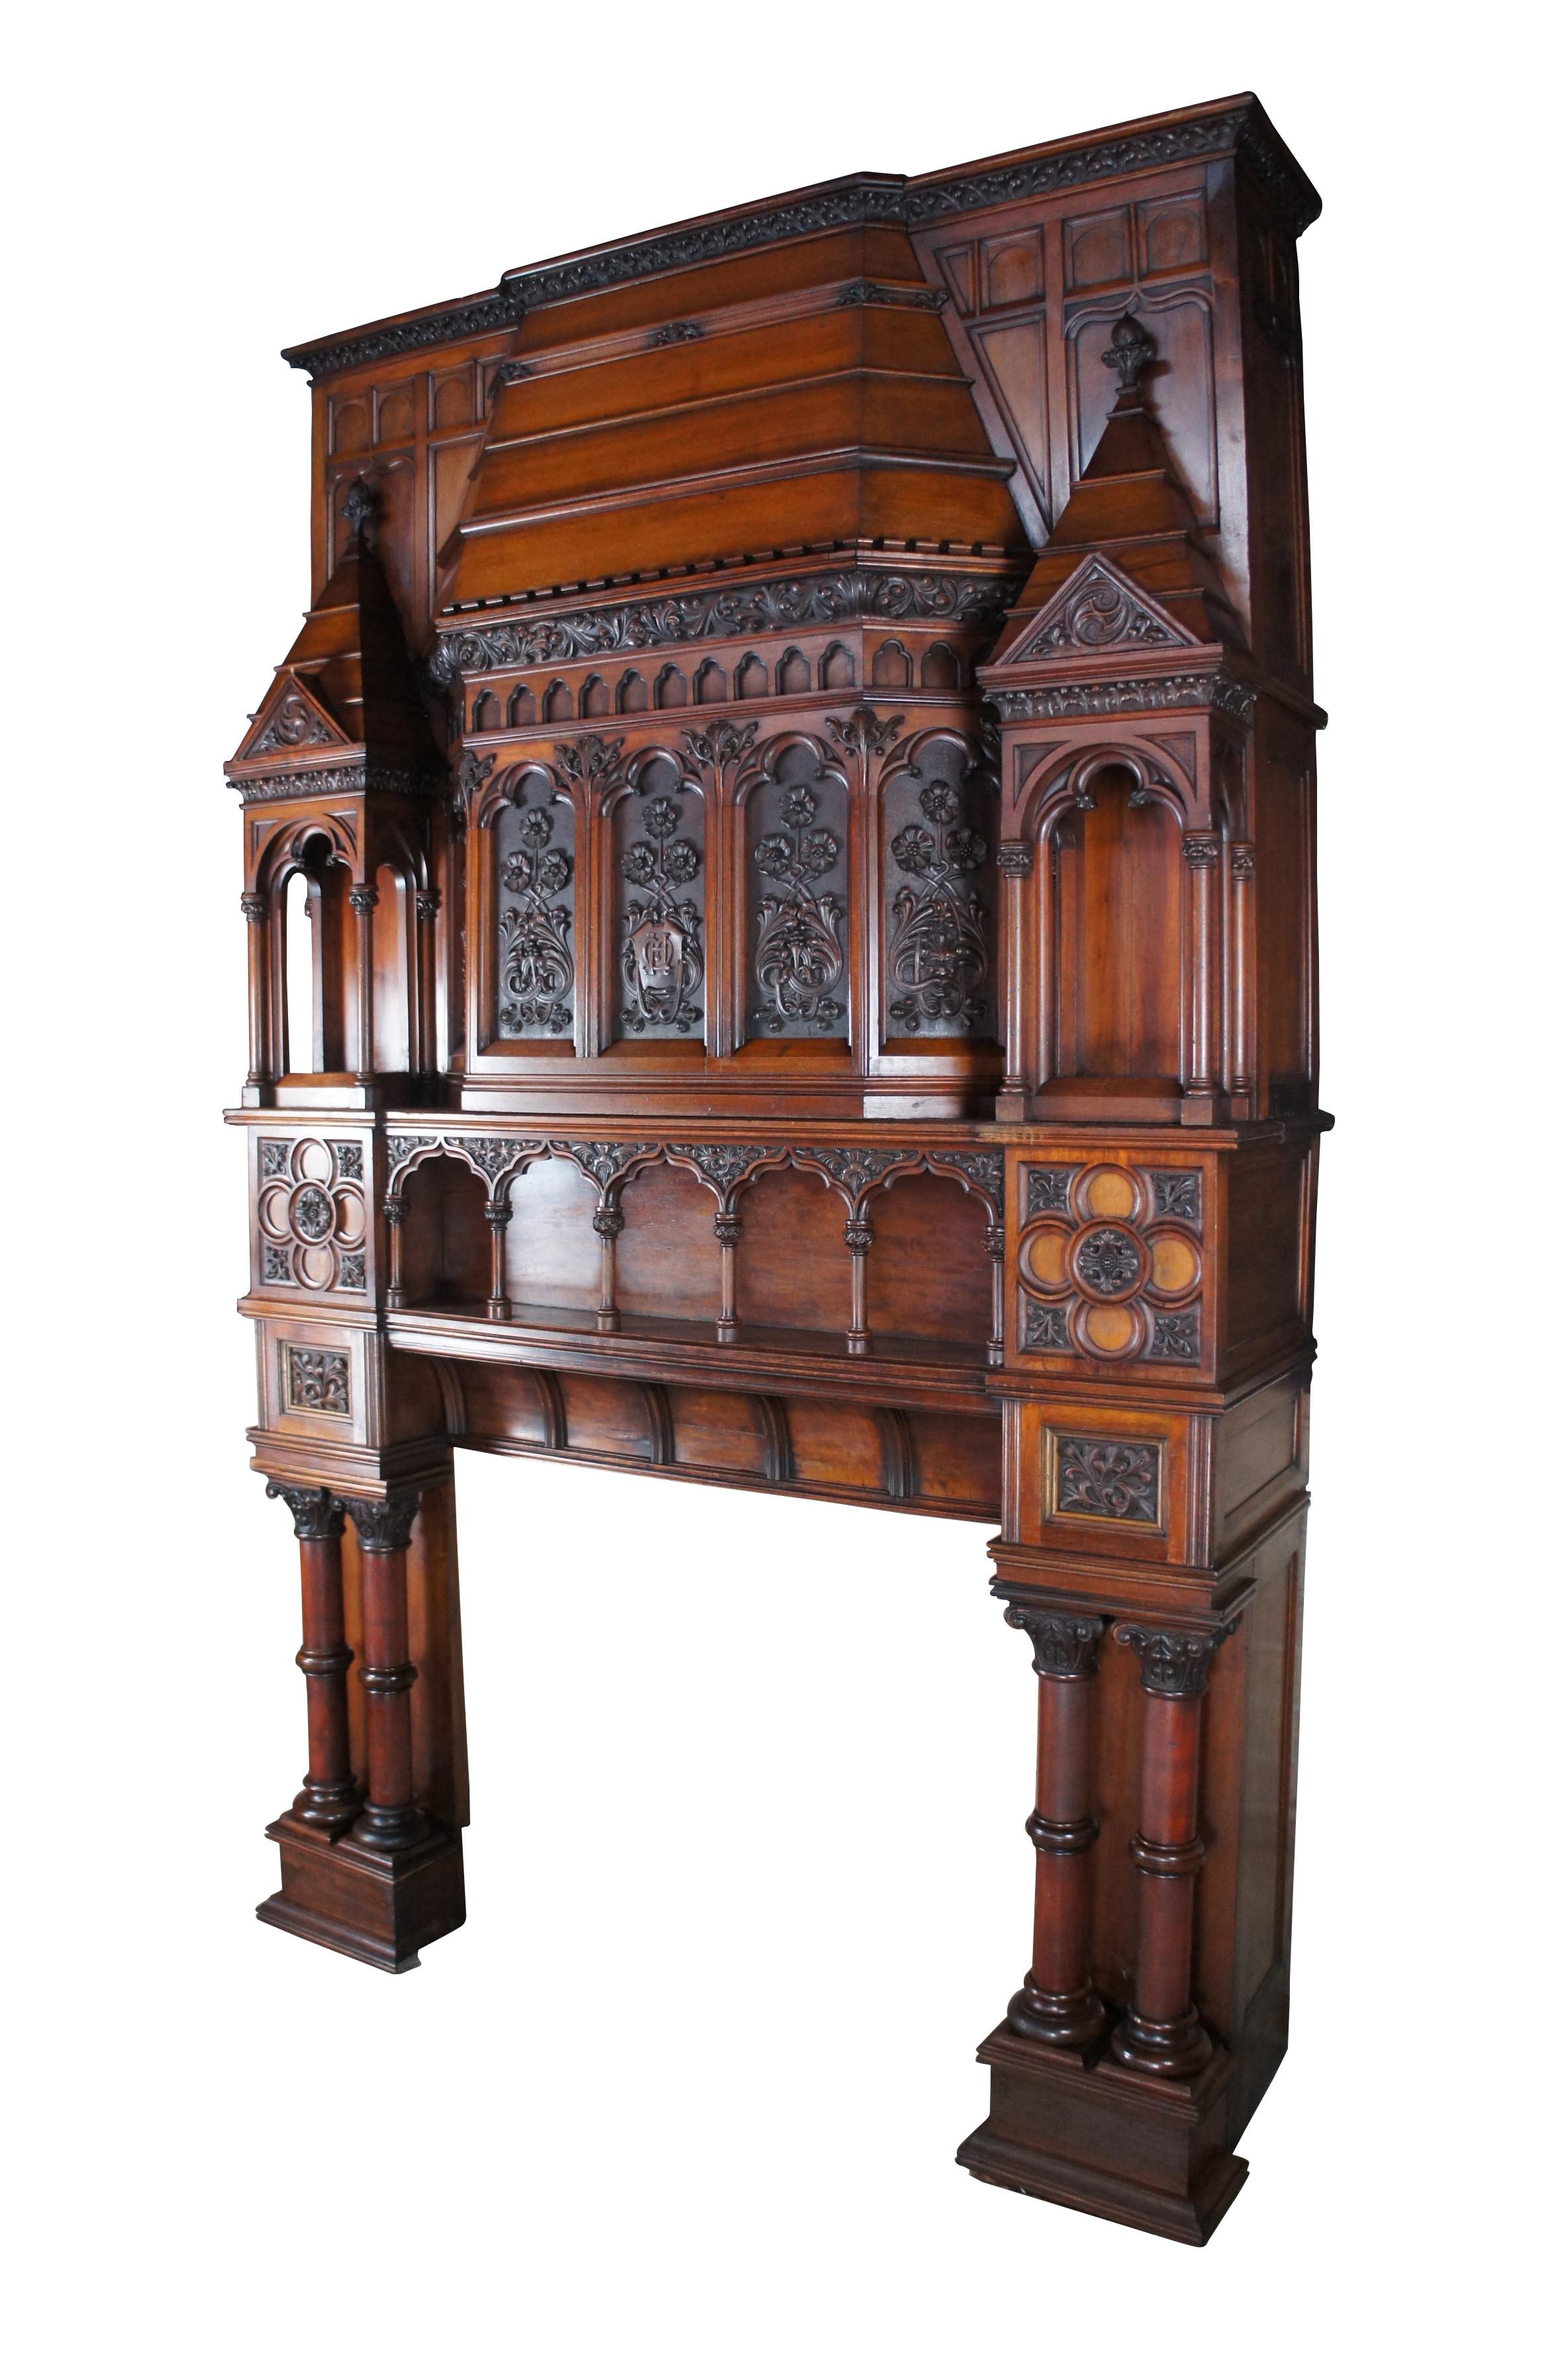 Very large and exceedingly rare English Renaissance Revival fireplace mantel, circa 1860s.  Made of hand carved walnut featuring a gothic cathedral design.  The fireplace portion is set between ornate Corinthian columns with carved capitals and a